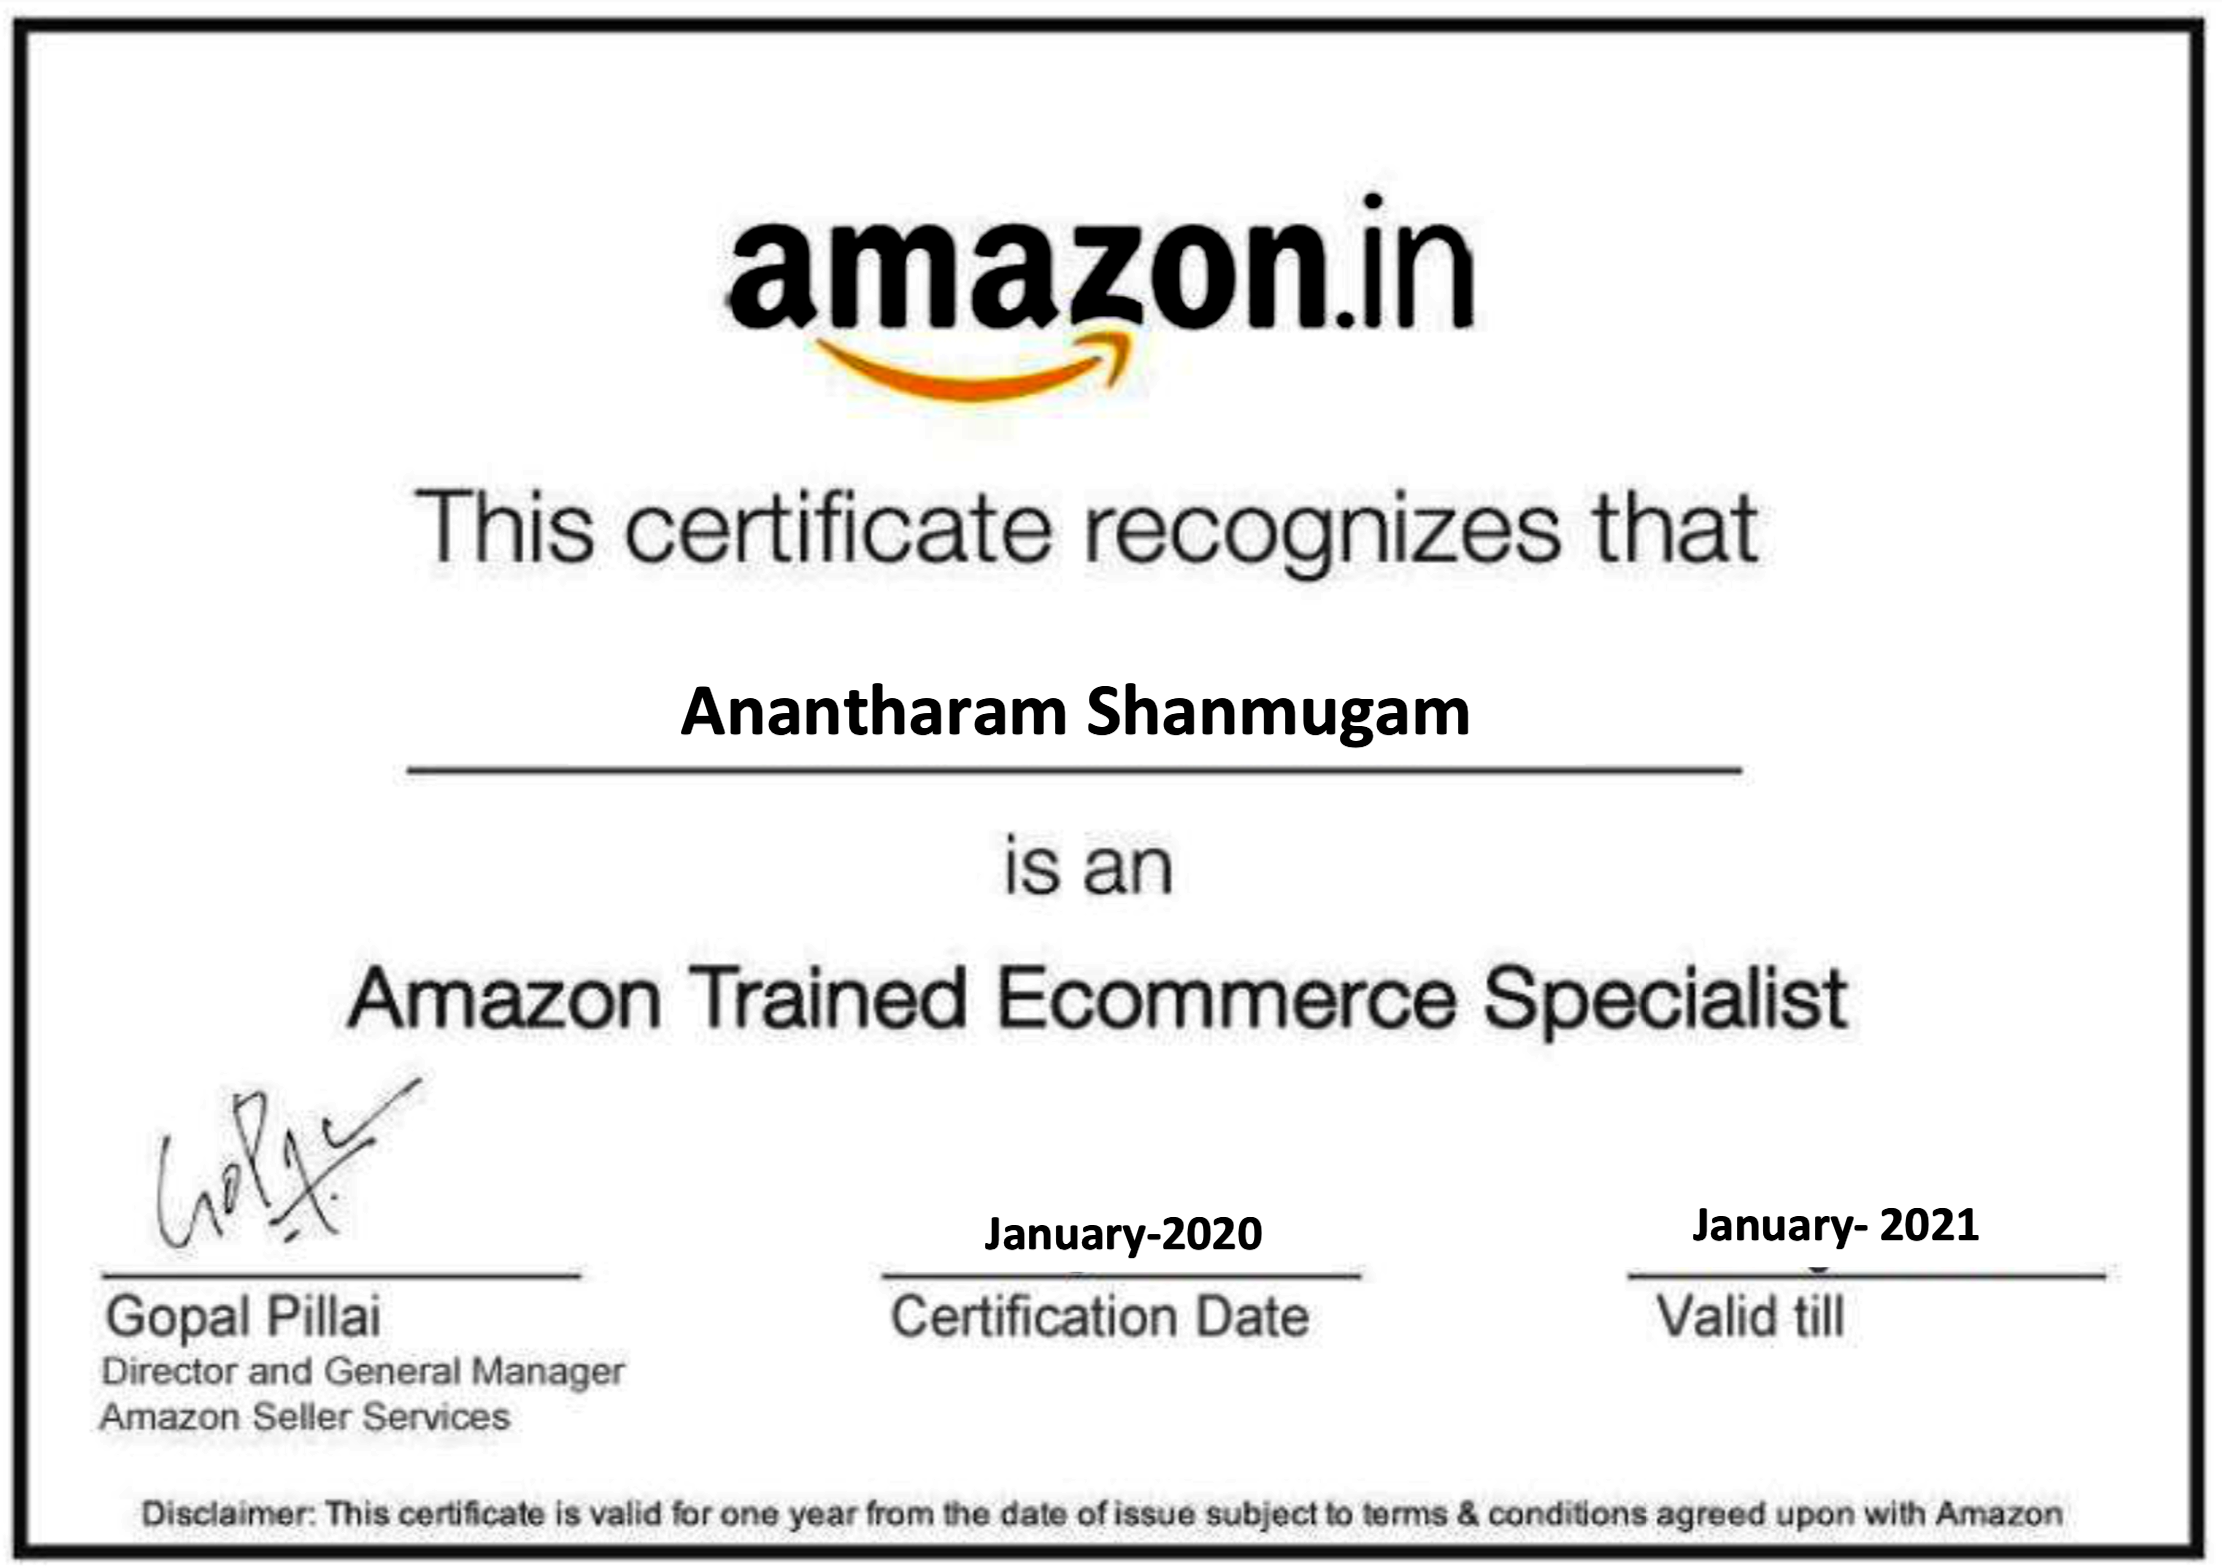 Amazon Trained Ecommerce Specialist Certificate